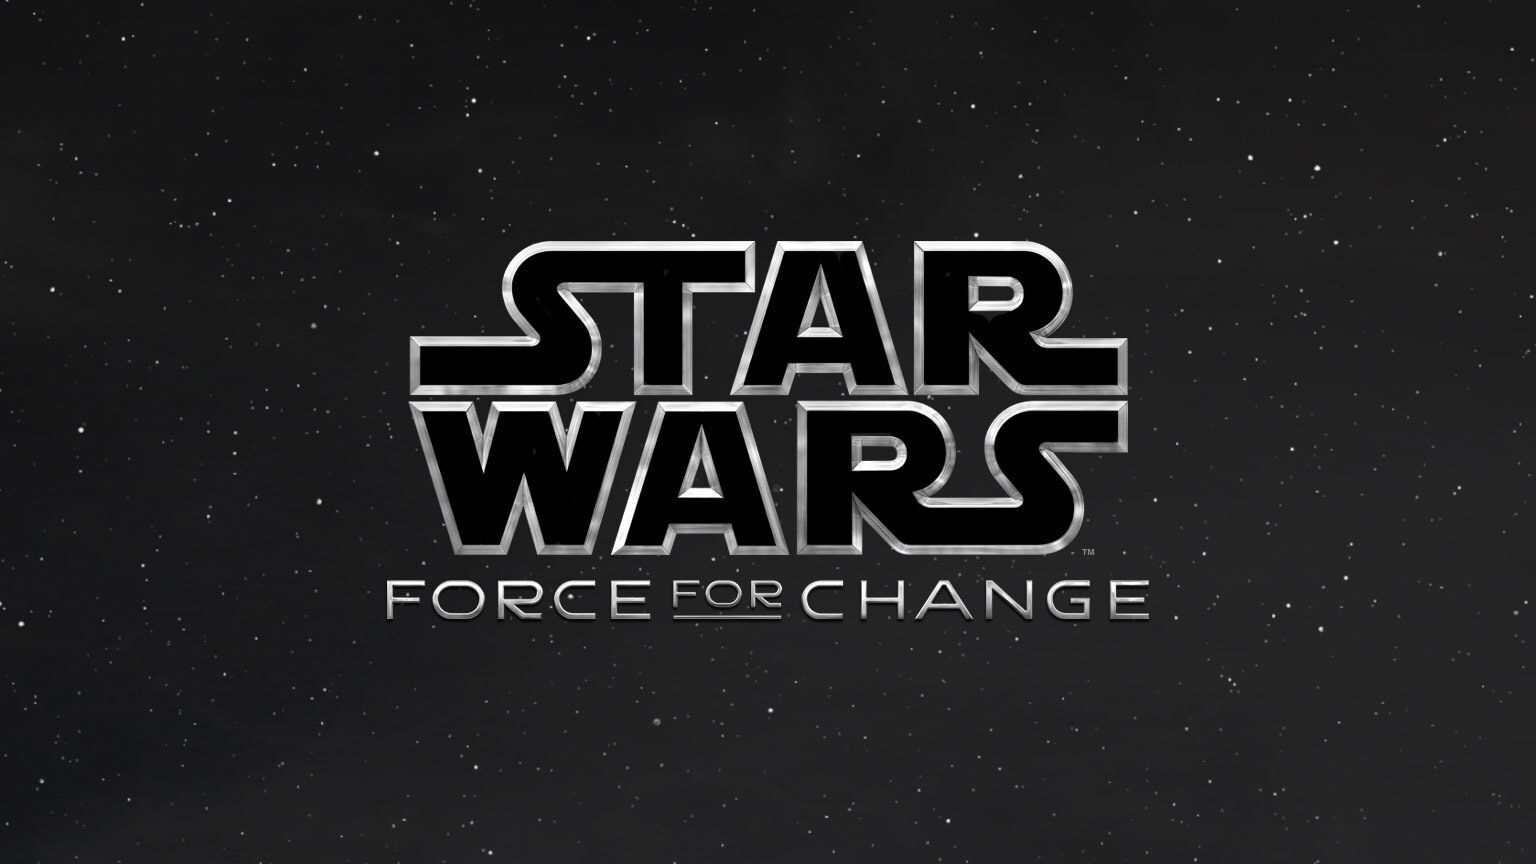 Star Wars: Force for Change Celebrates 4 million food packets for children in need!